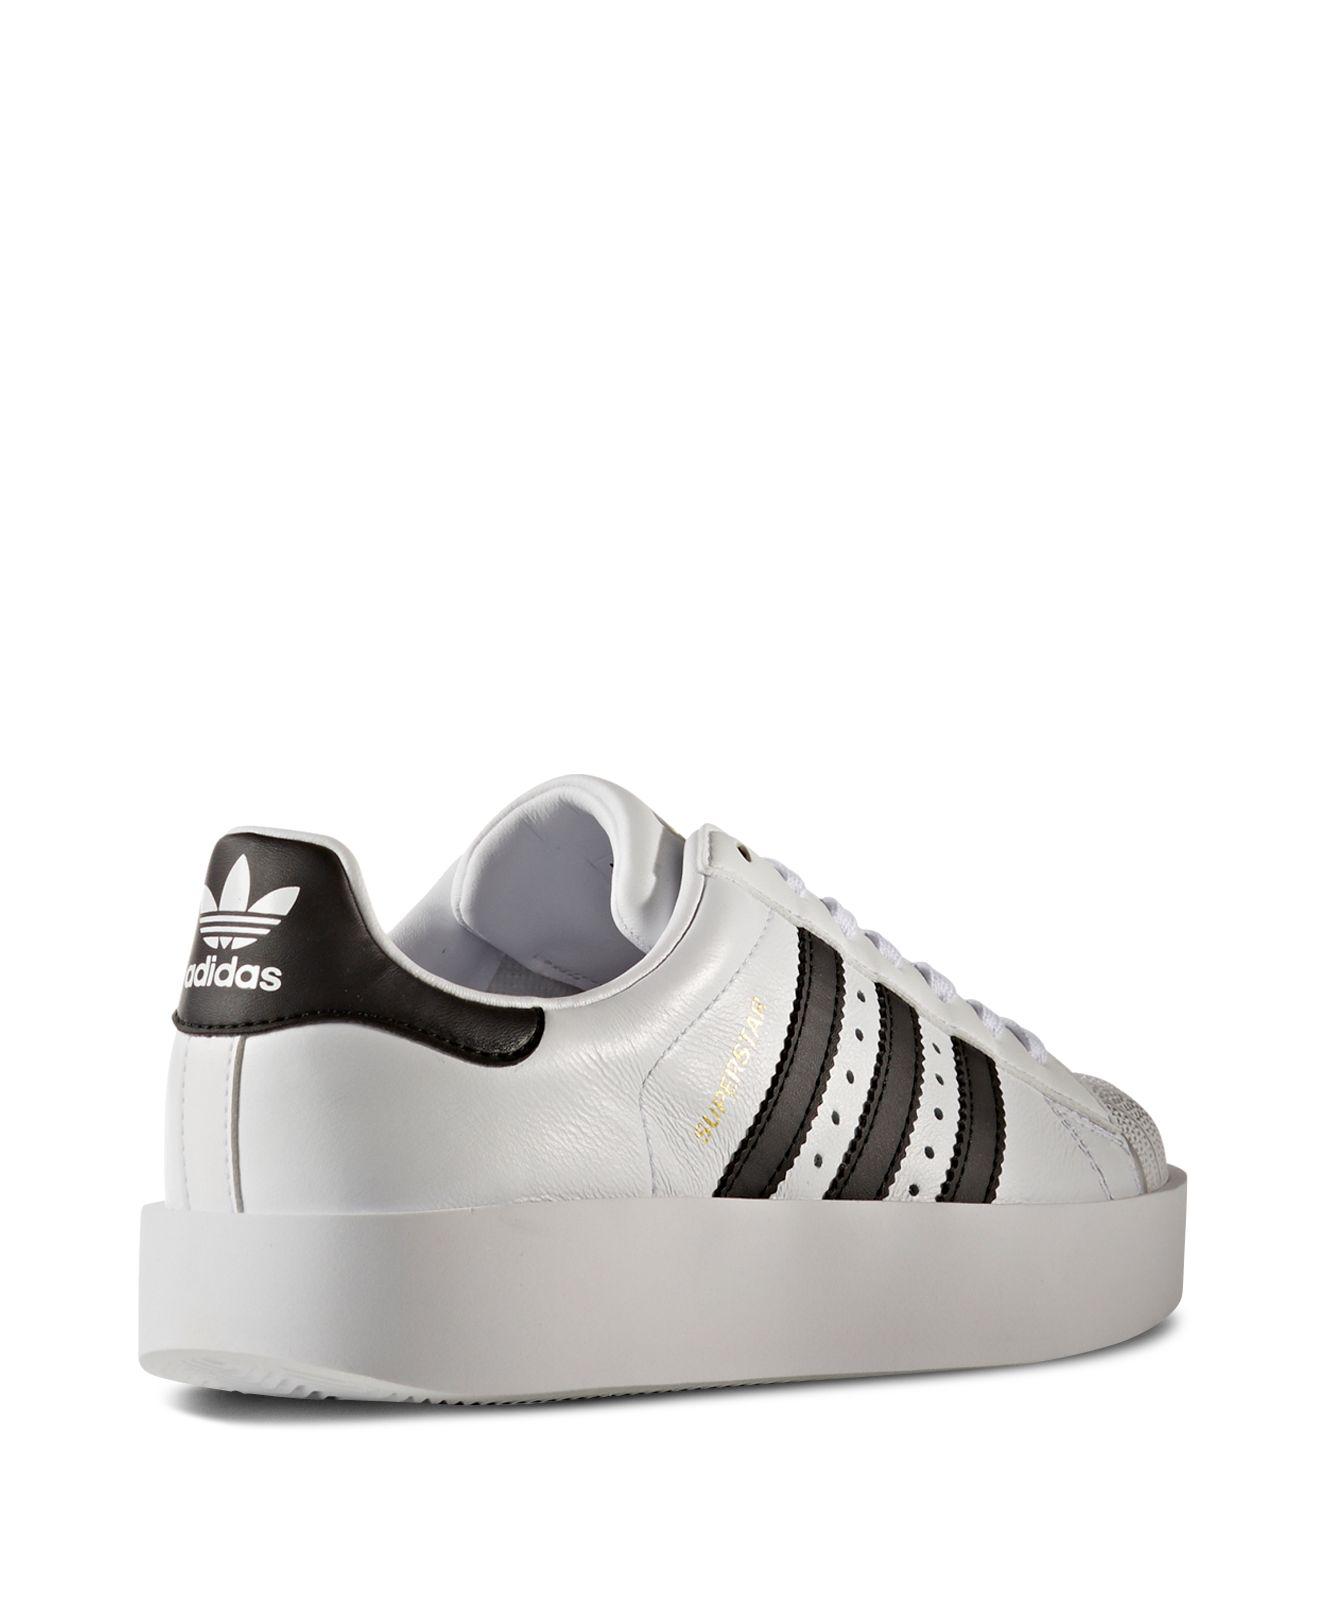 adidas Women's Superstar Bold Platform Lace Up Sneakers in White/Black  (White) - Lyst